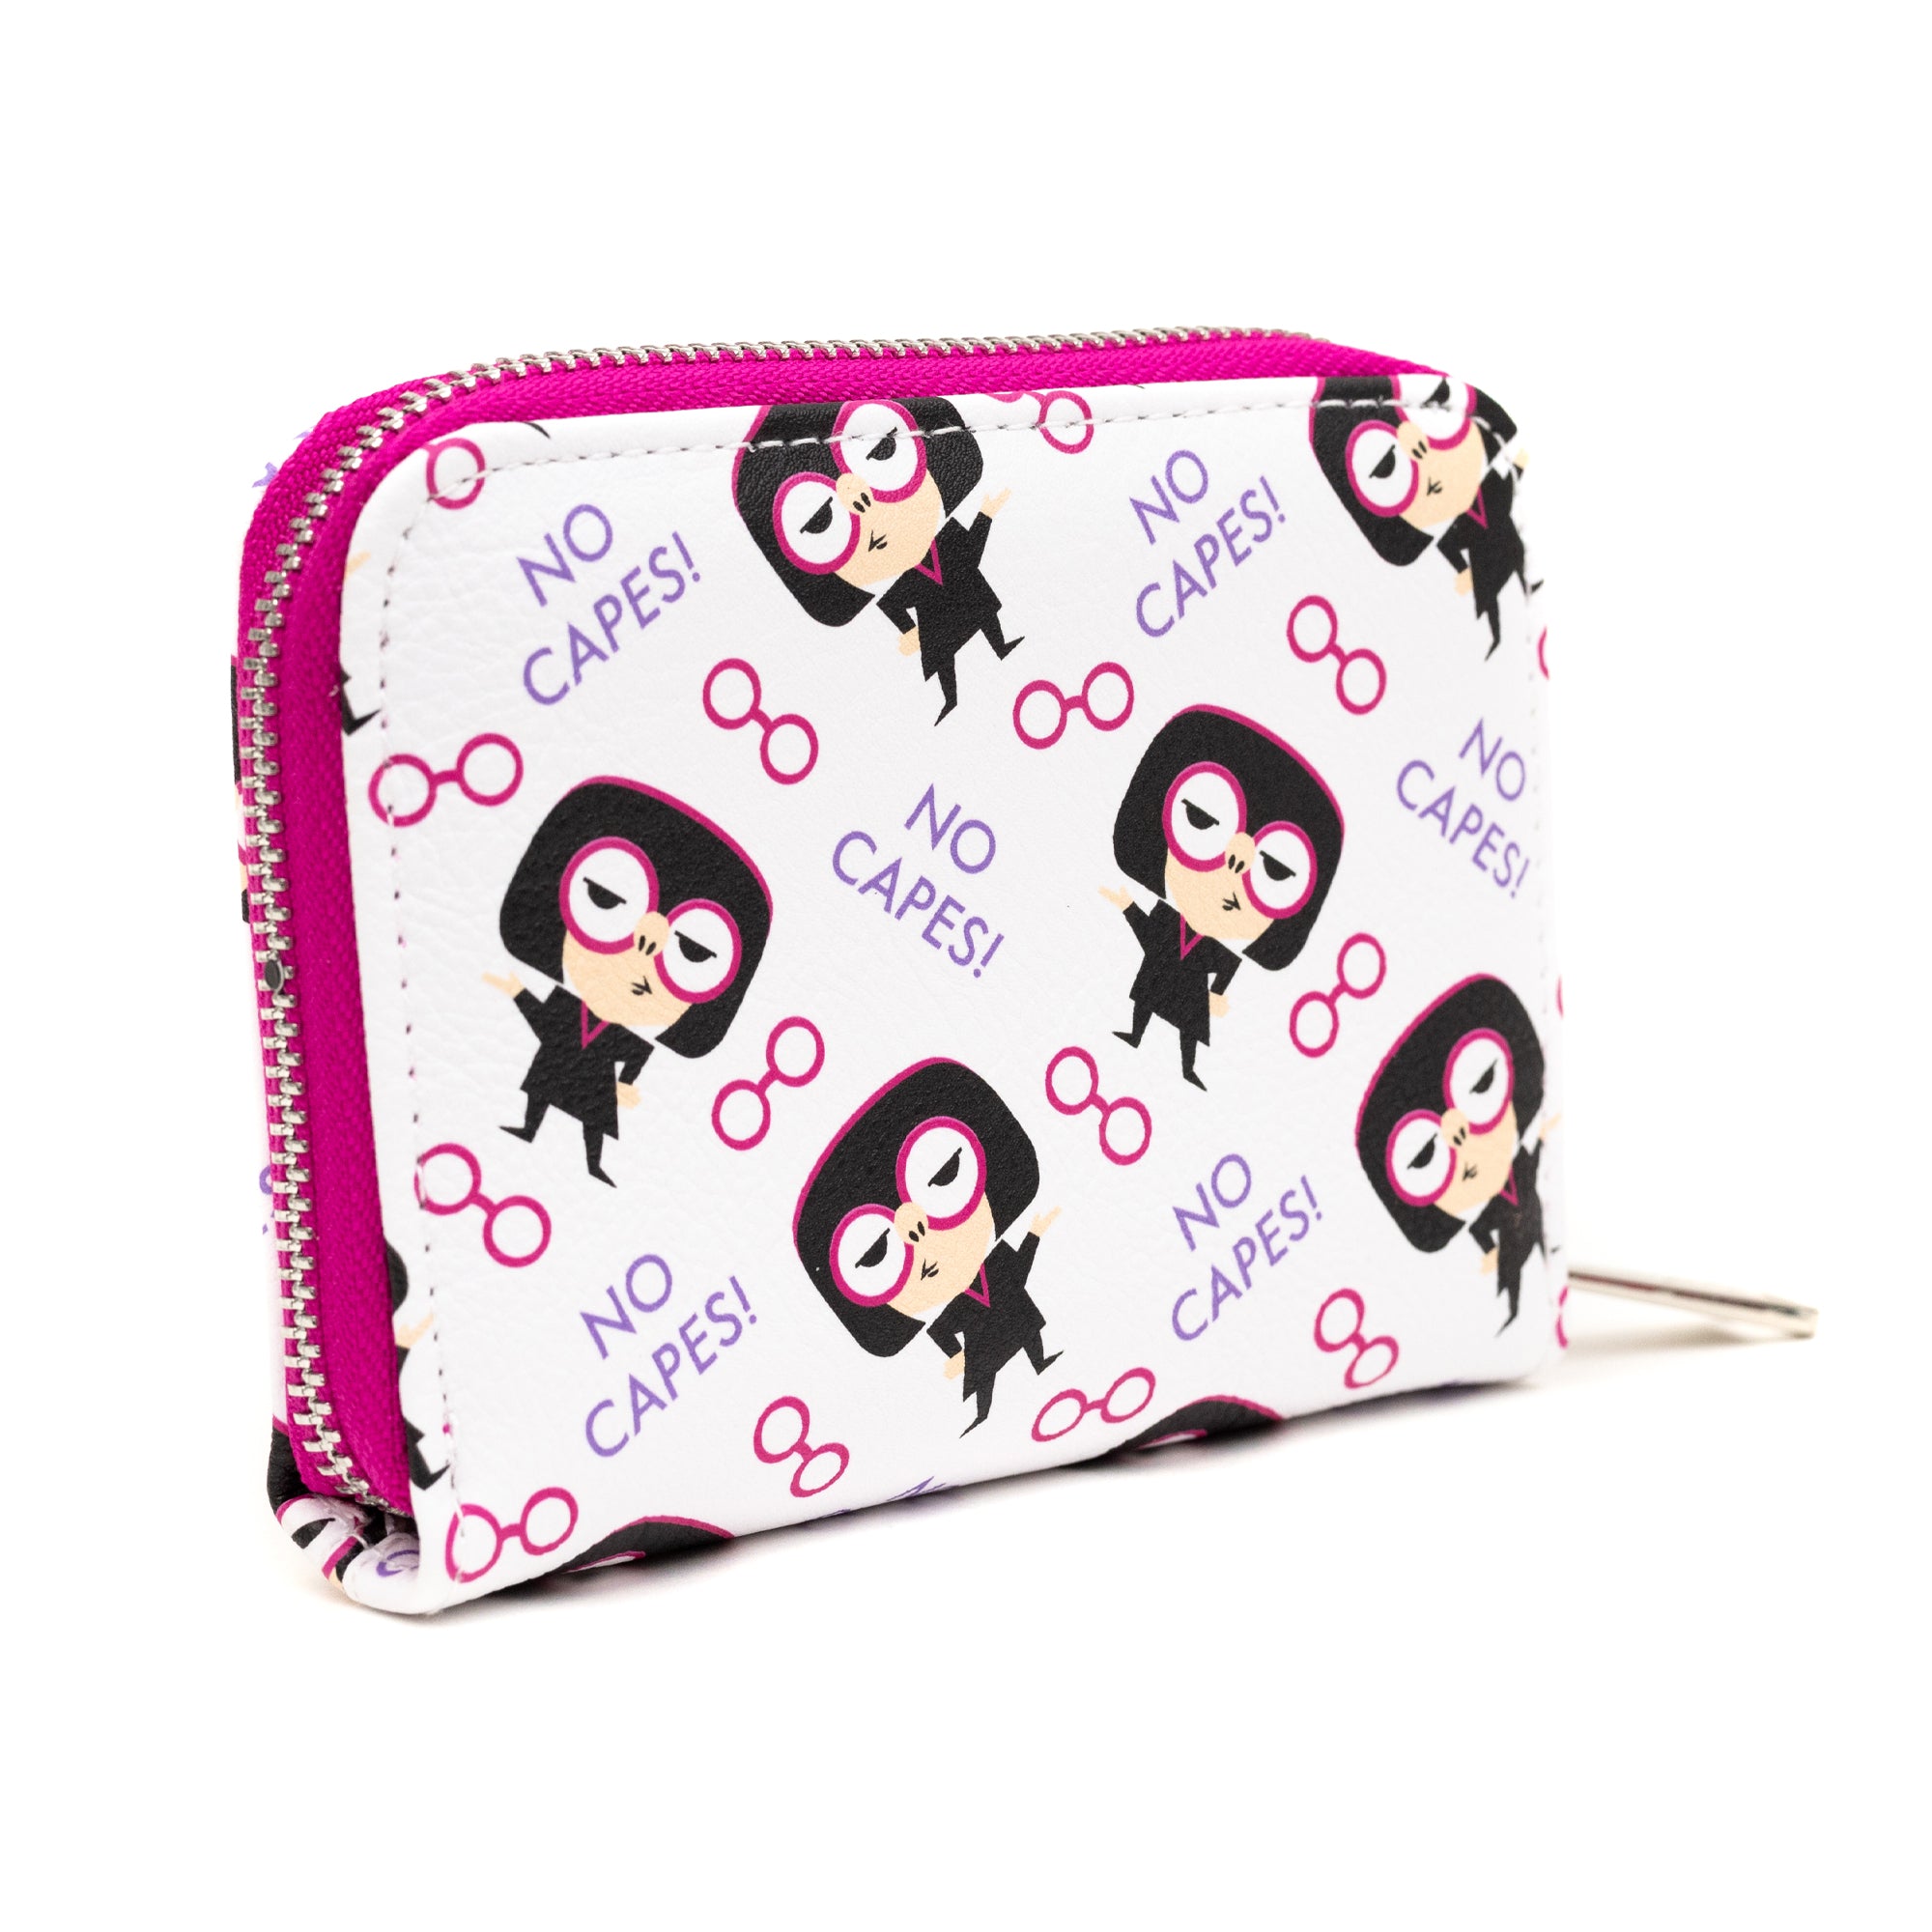 Loungefly Disney Edna Mode "No Capes" Wallet